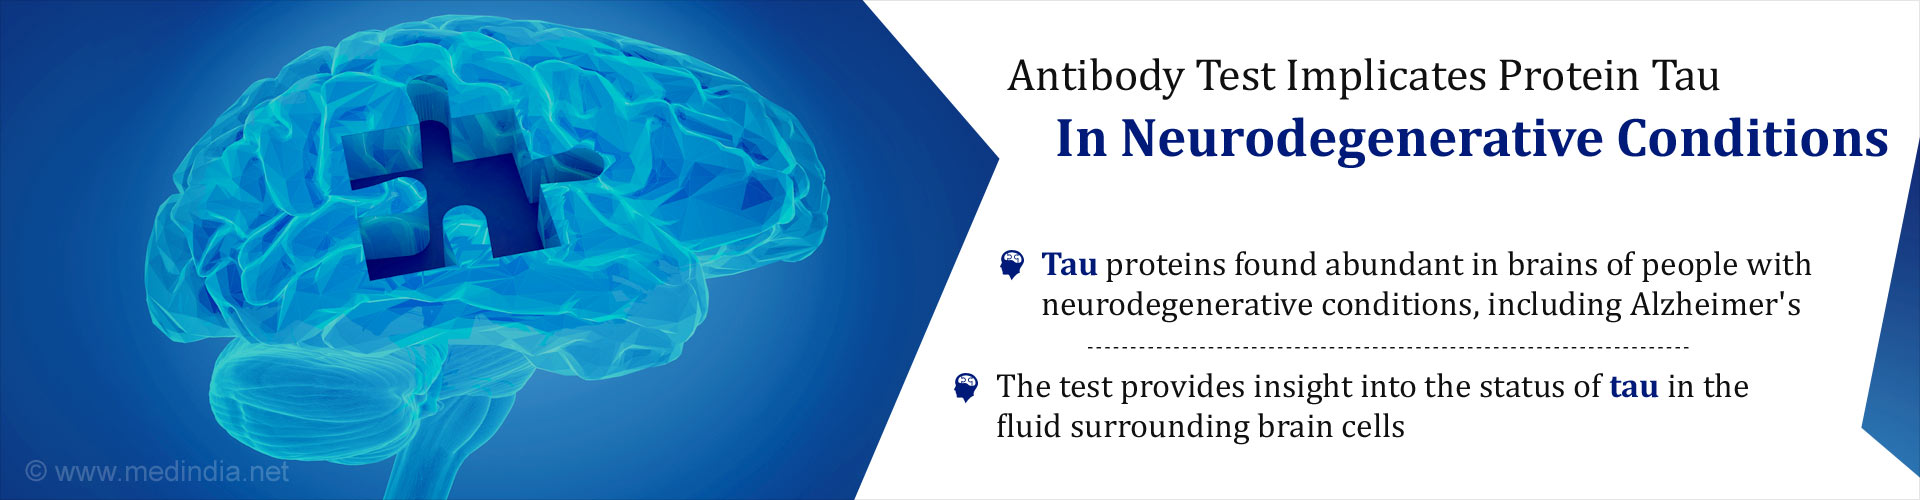 Antibody test implicates protein tau in neurodegenerative conditions
- Tau proteins found abundant in brains of people with neurodegenerative conditions, including Alzeimer''s
- The test provides insight into status of tau in the fluid surrounding brain cells